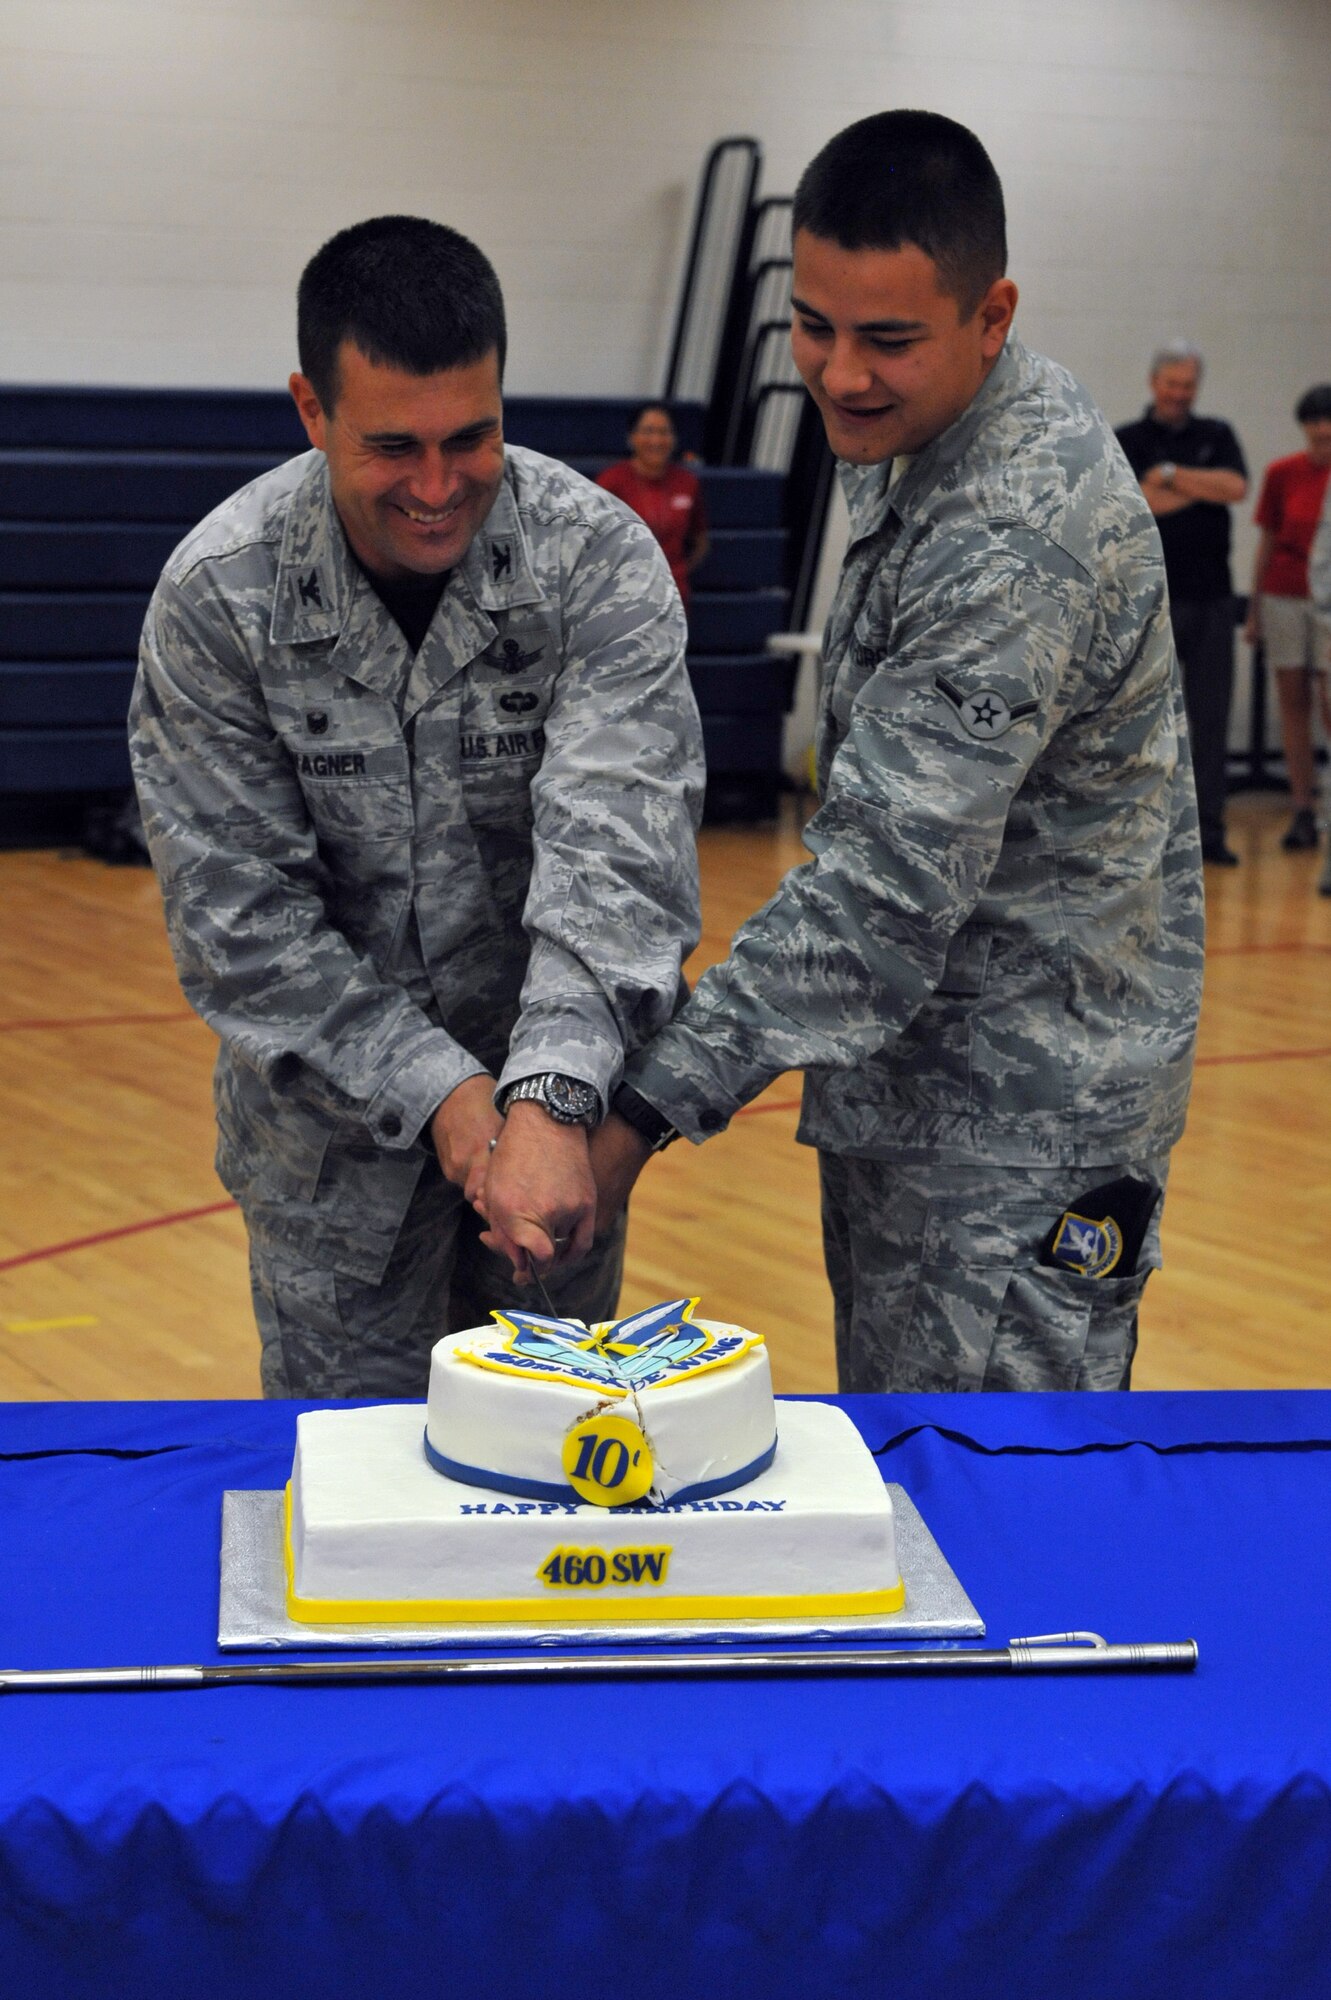 Col. John Wagner, 460th Space Wing commander, cuts the cake with Airman Emilio Munoz-Shade, 460th Security Forces Squadron apprentice, during FunFest Aug. 22, 2014 on Buckley Air Force Base, Colo. The 460th Space Wing celebrated its 10th birthday with FunFest, a day filled with sport competitions and a community fair. (U.S. Air Force photo by Airman Emily E. Amyotte/Released)